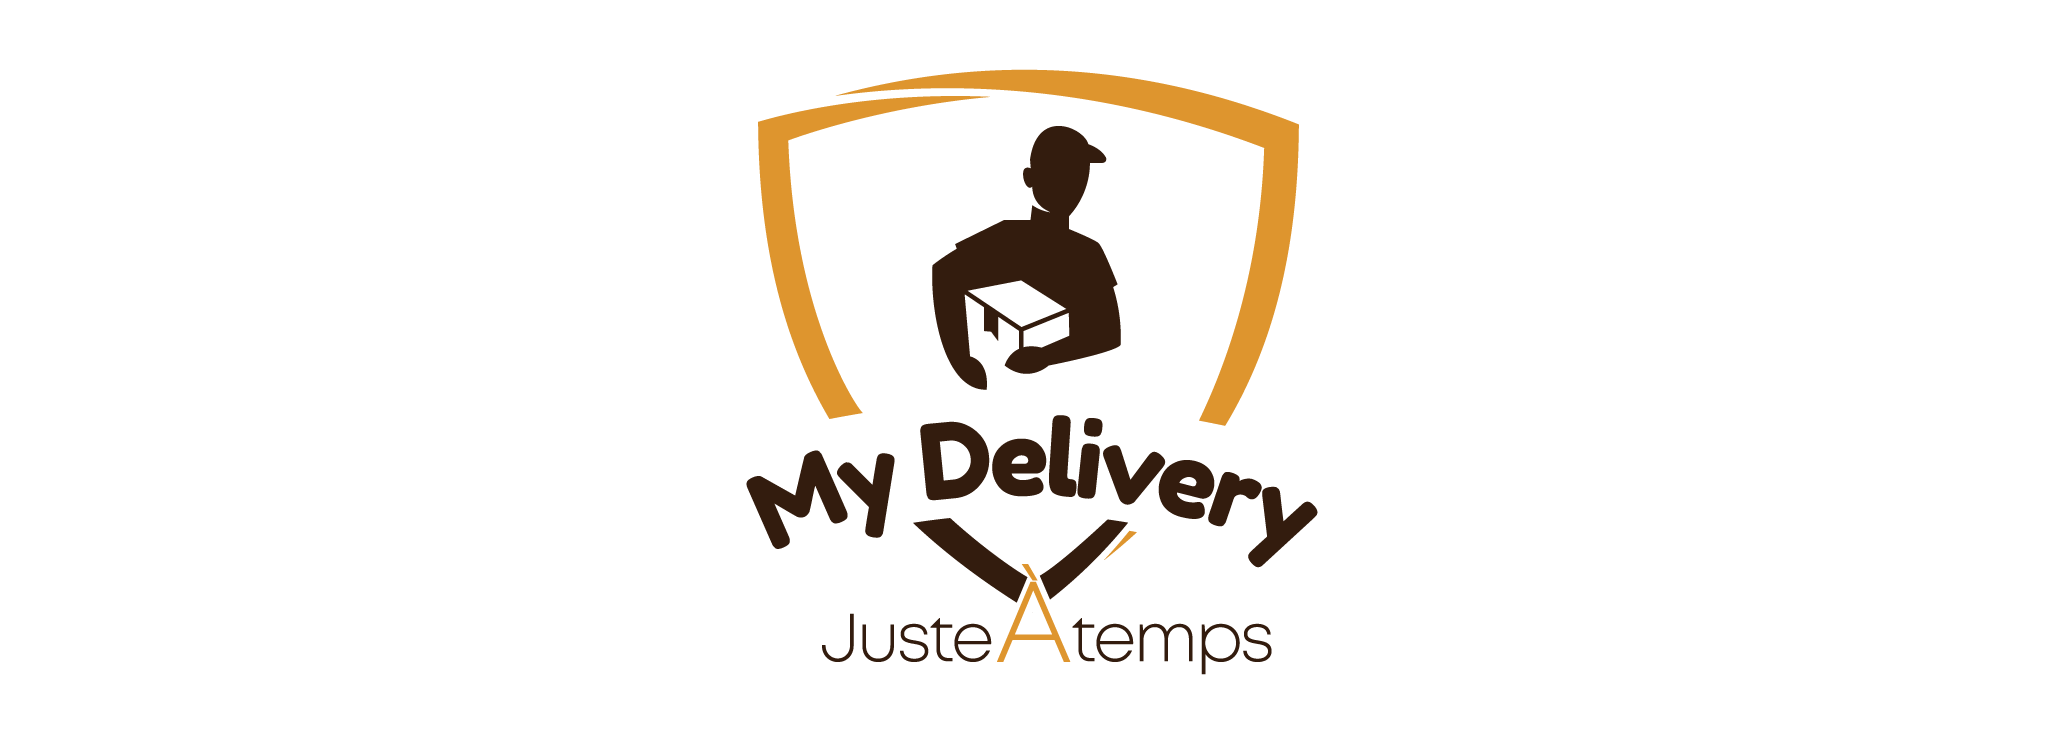 My delivery logo